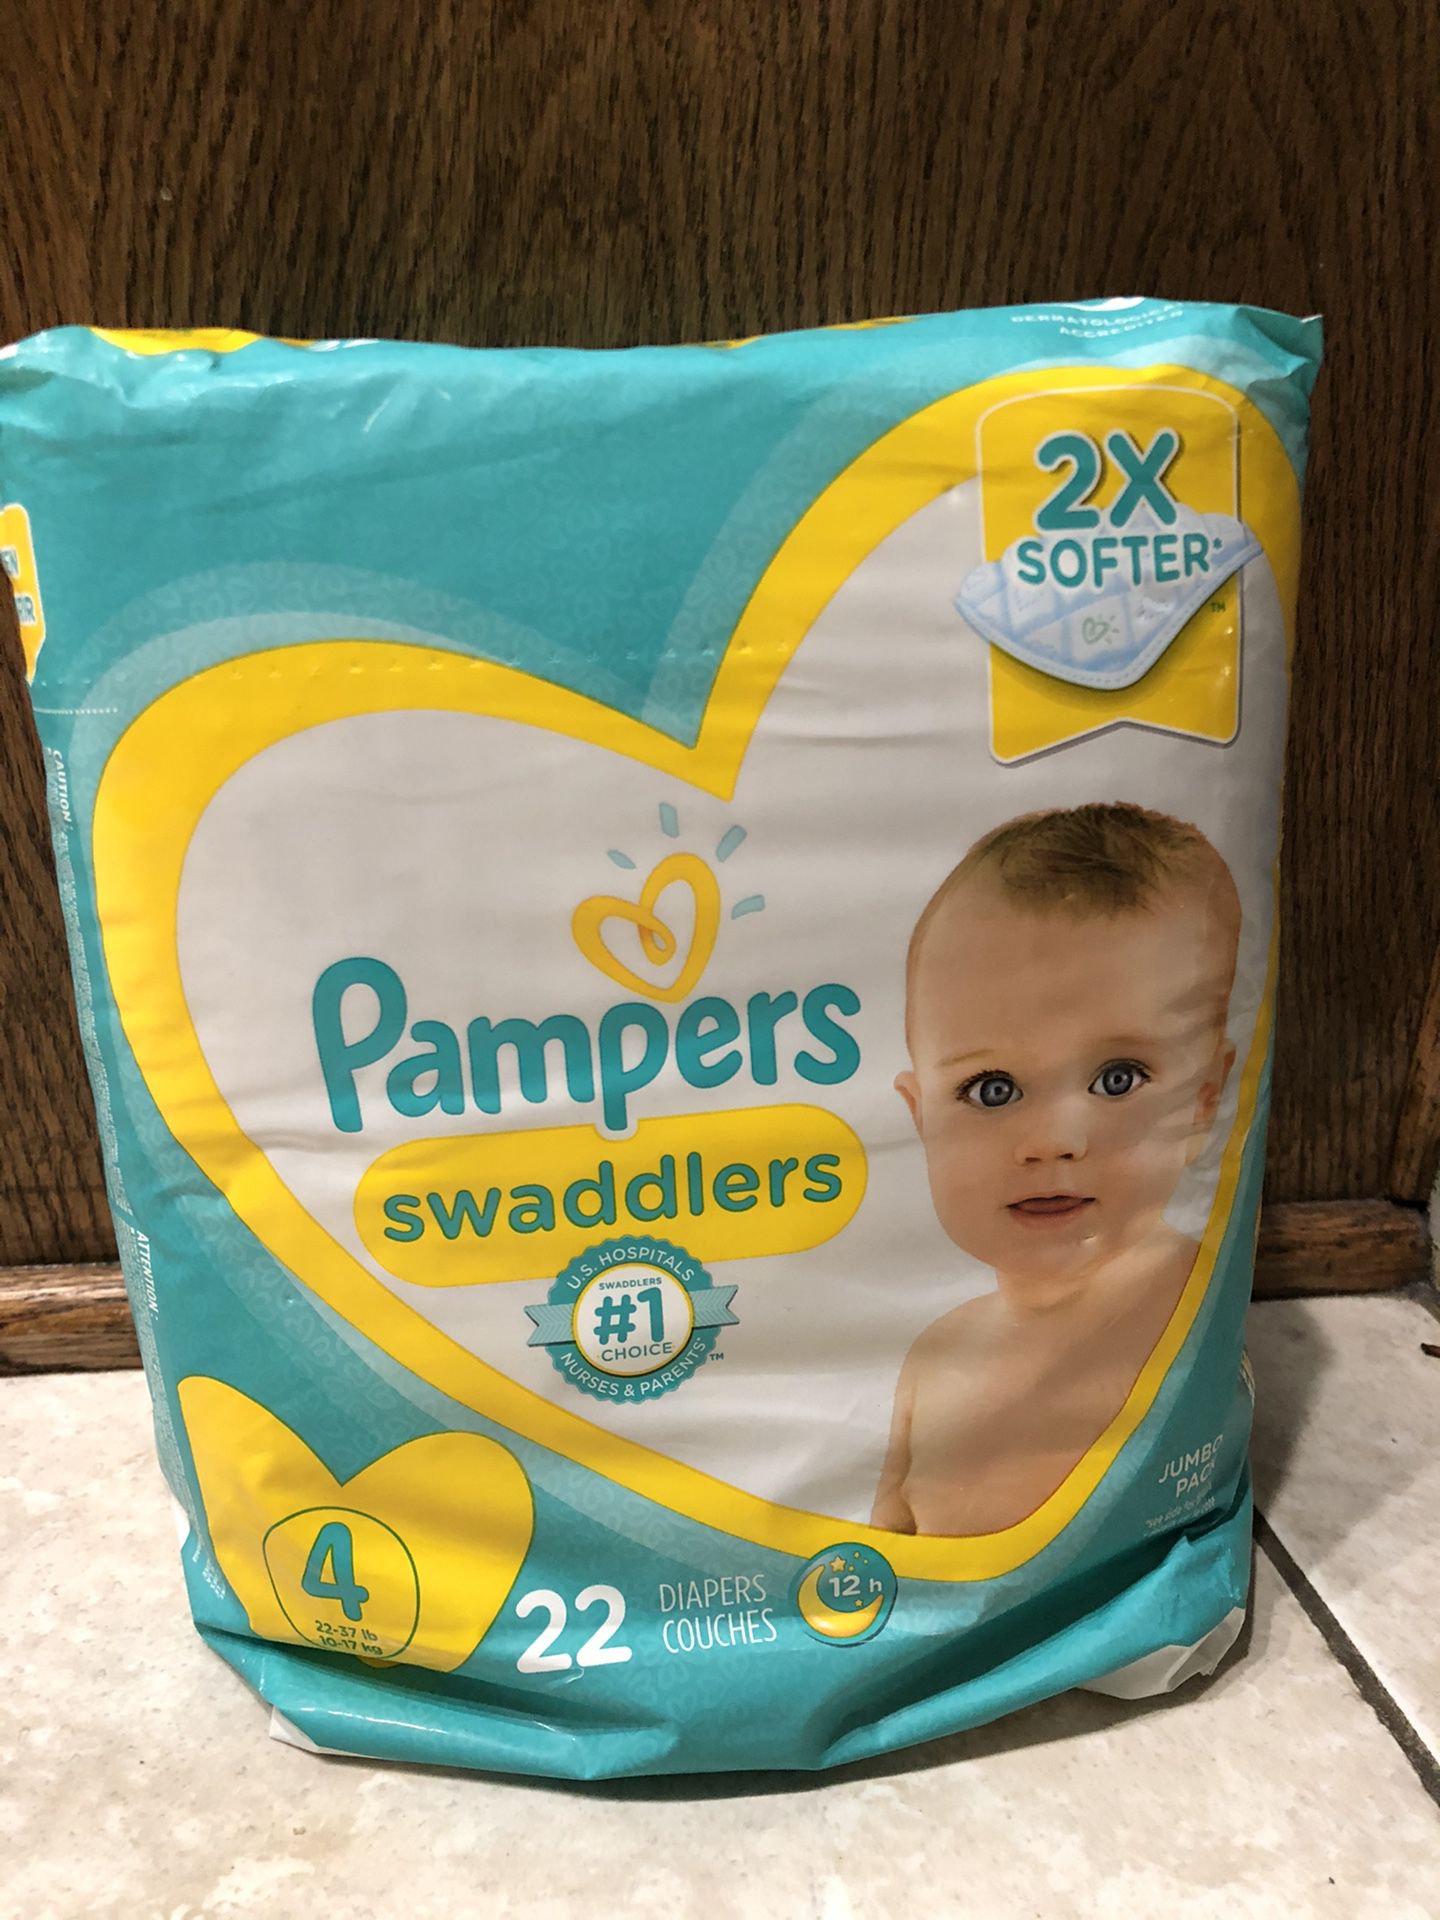 Pampers Swaddlers Diapers Size 4 New Unopened